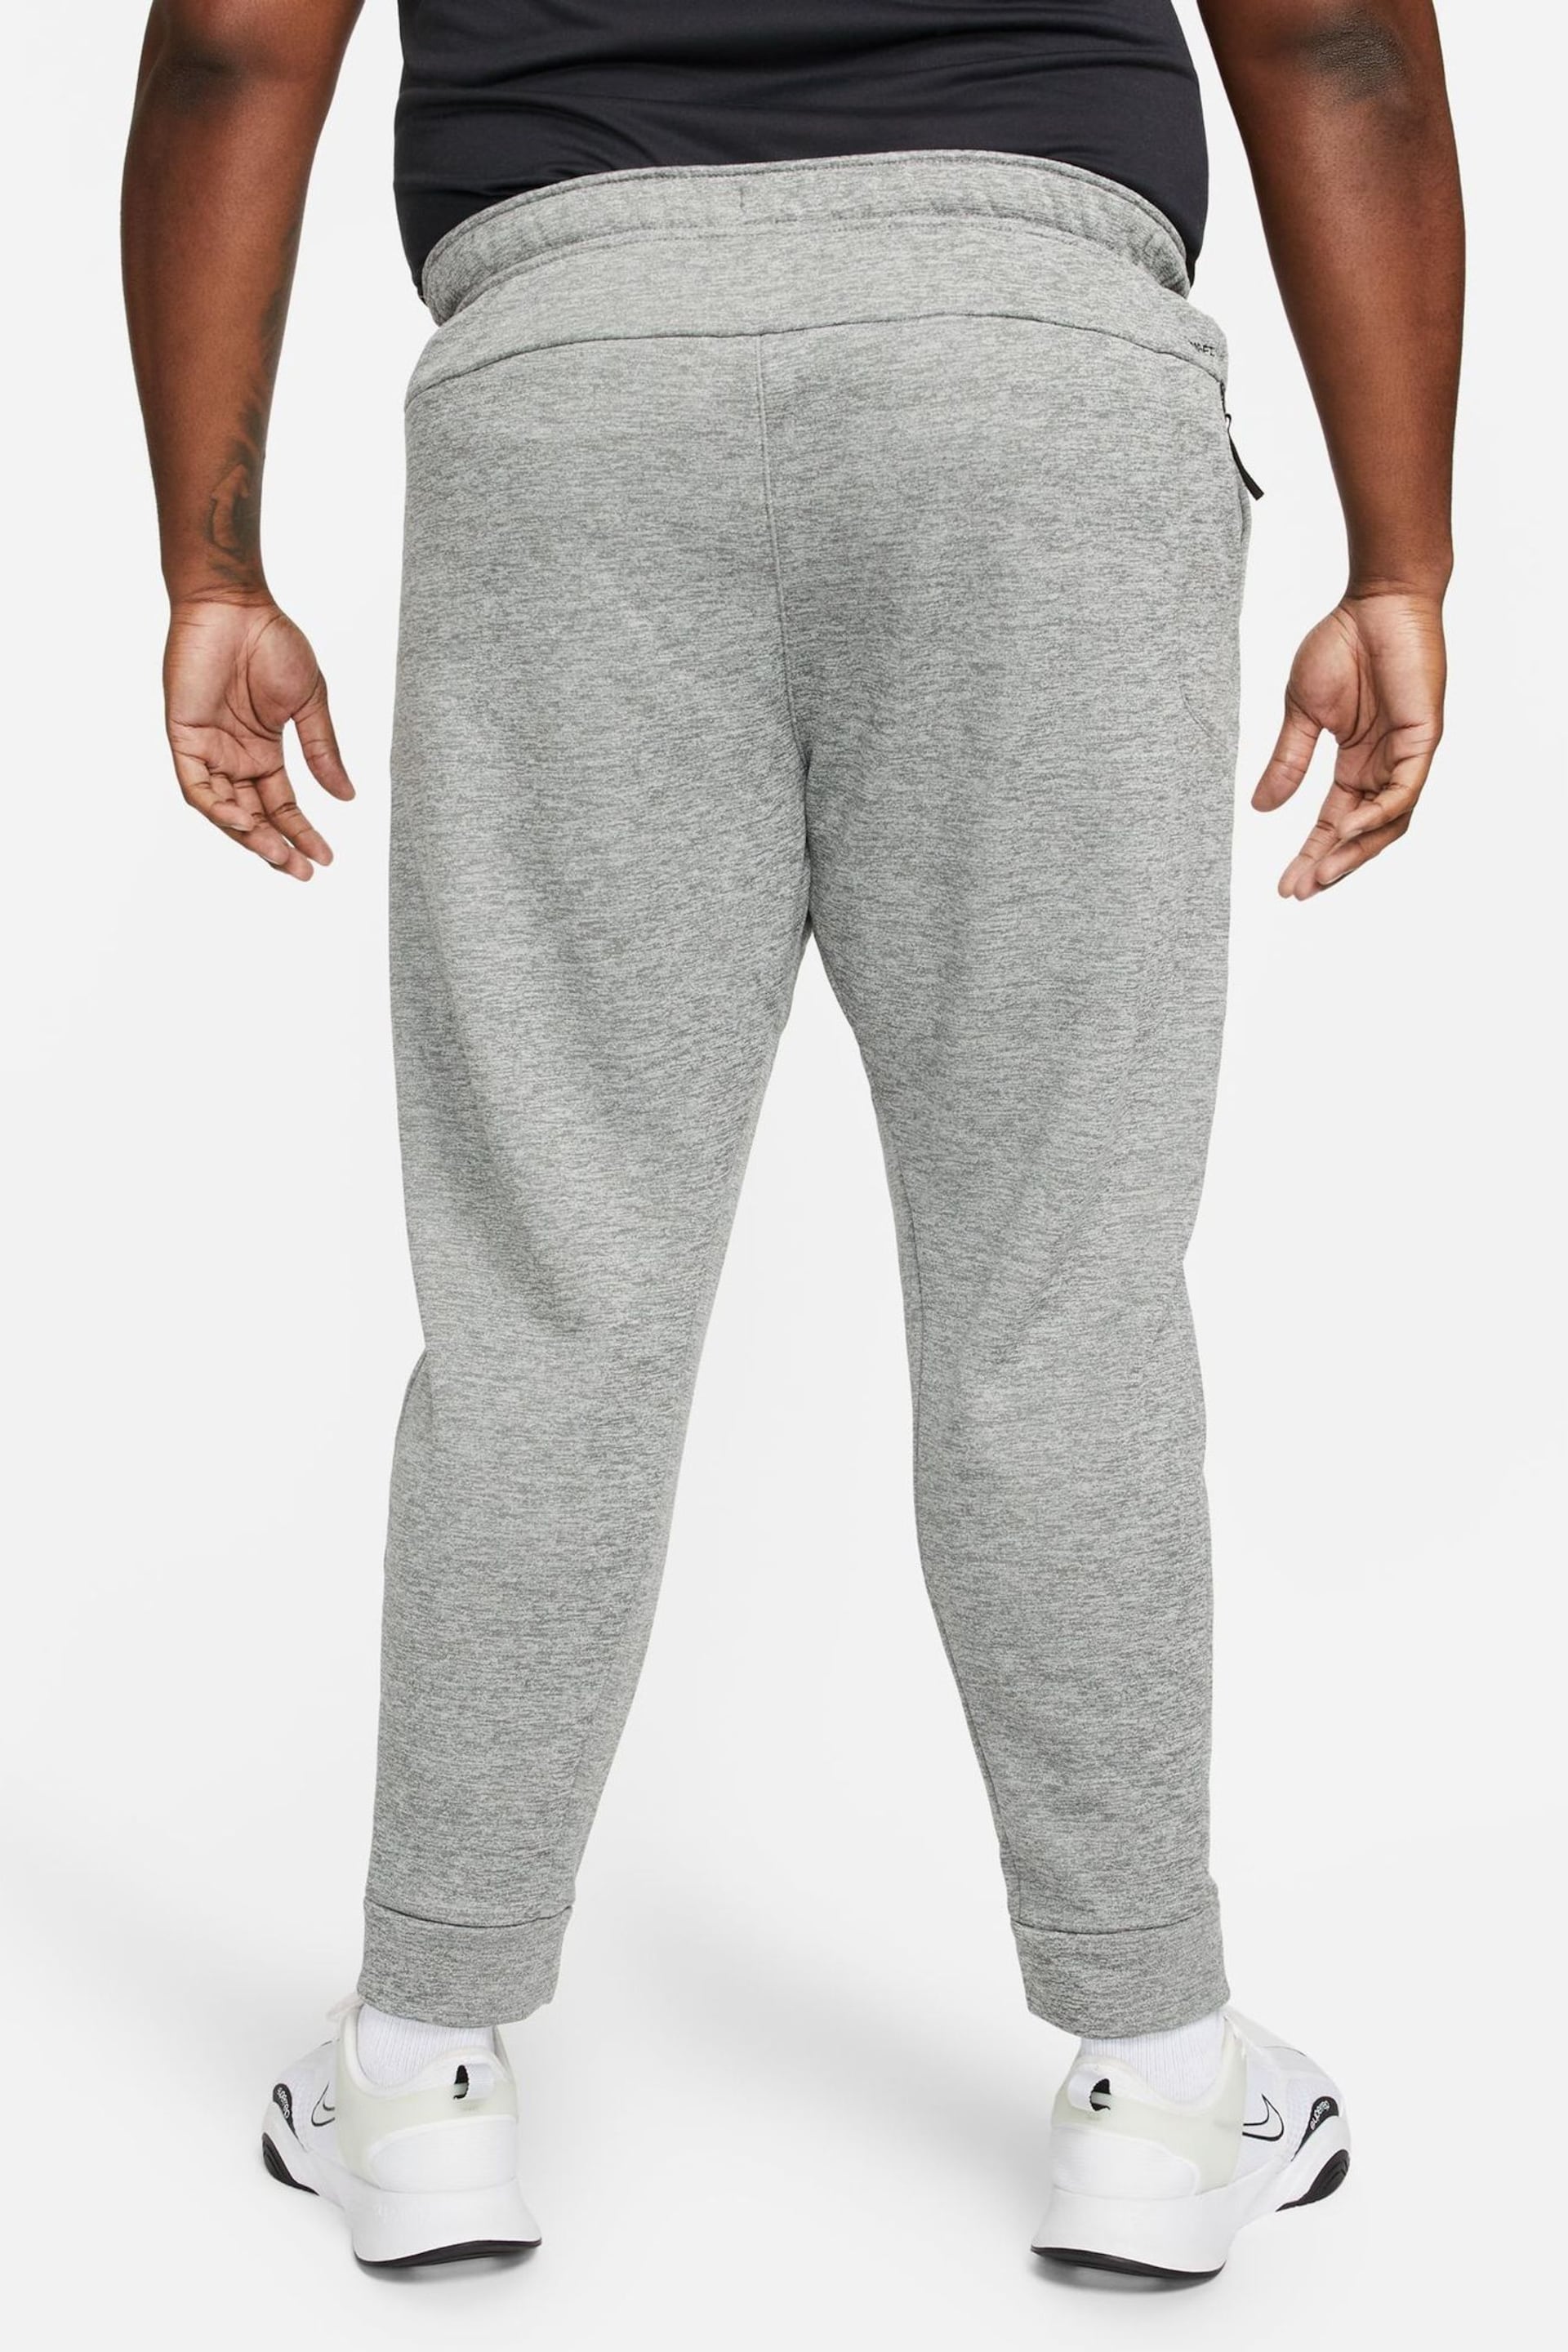 Nike Dark Grey Therma-FIT Training Joggers - Image 5 of 13